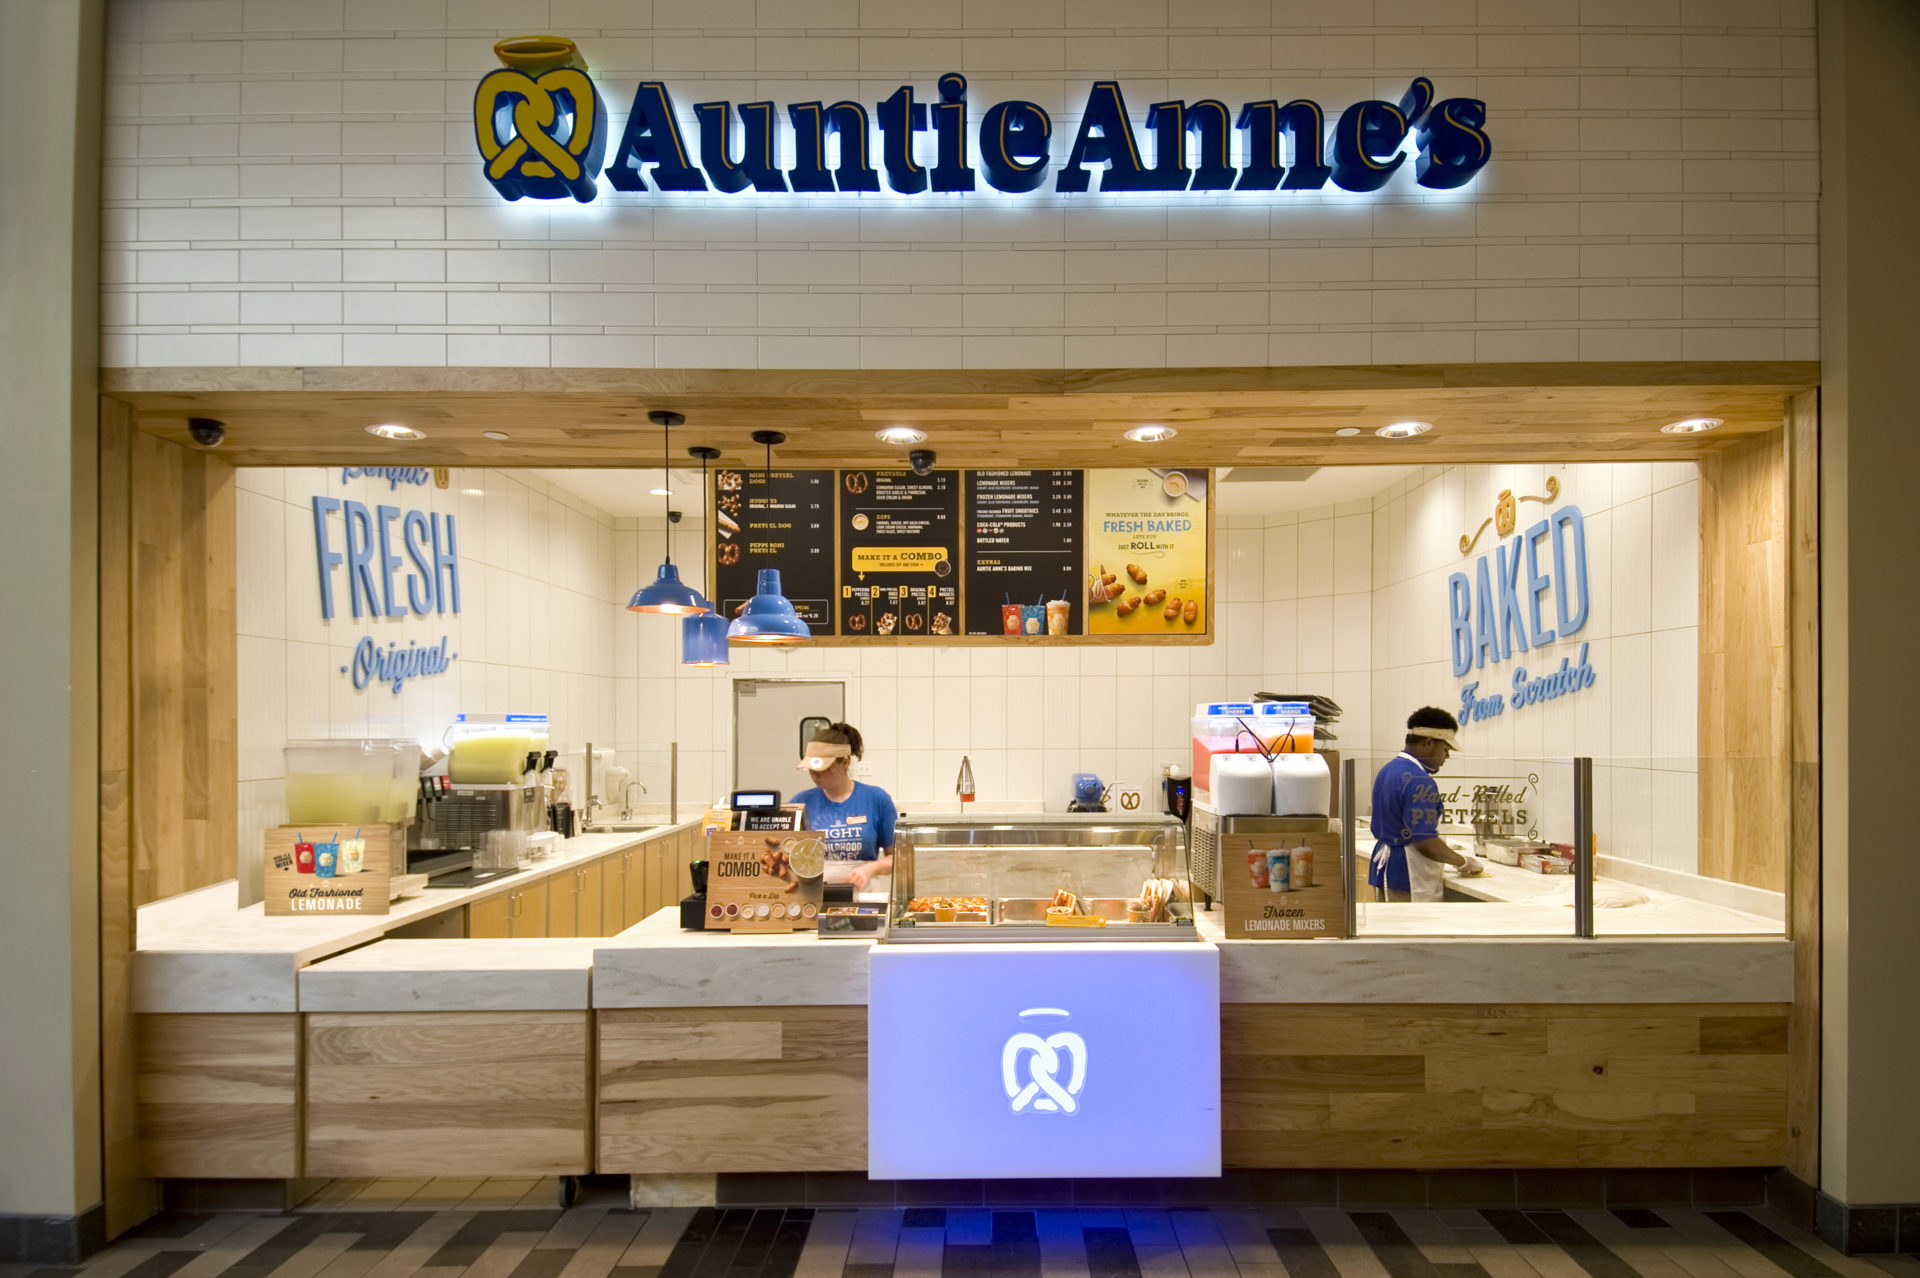 Standing in line at an Auntie Anne's establishment.